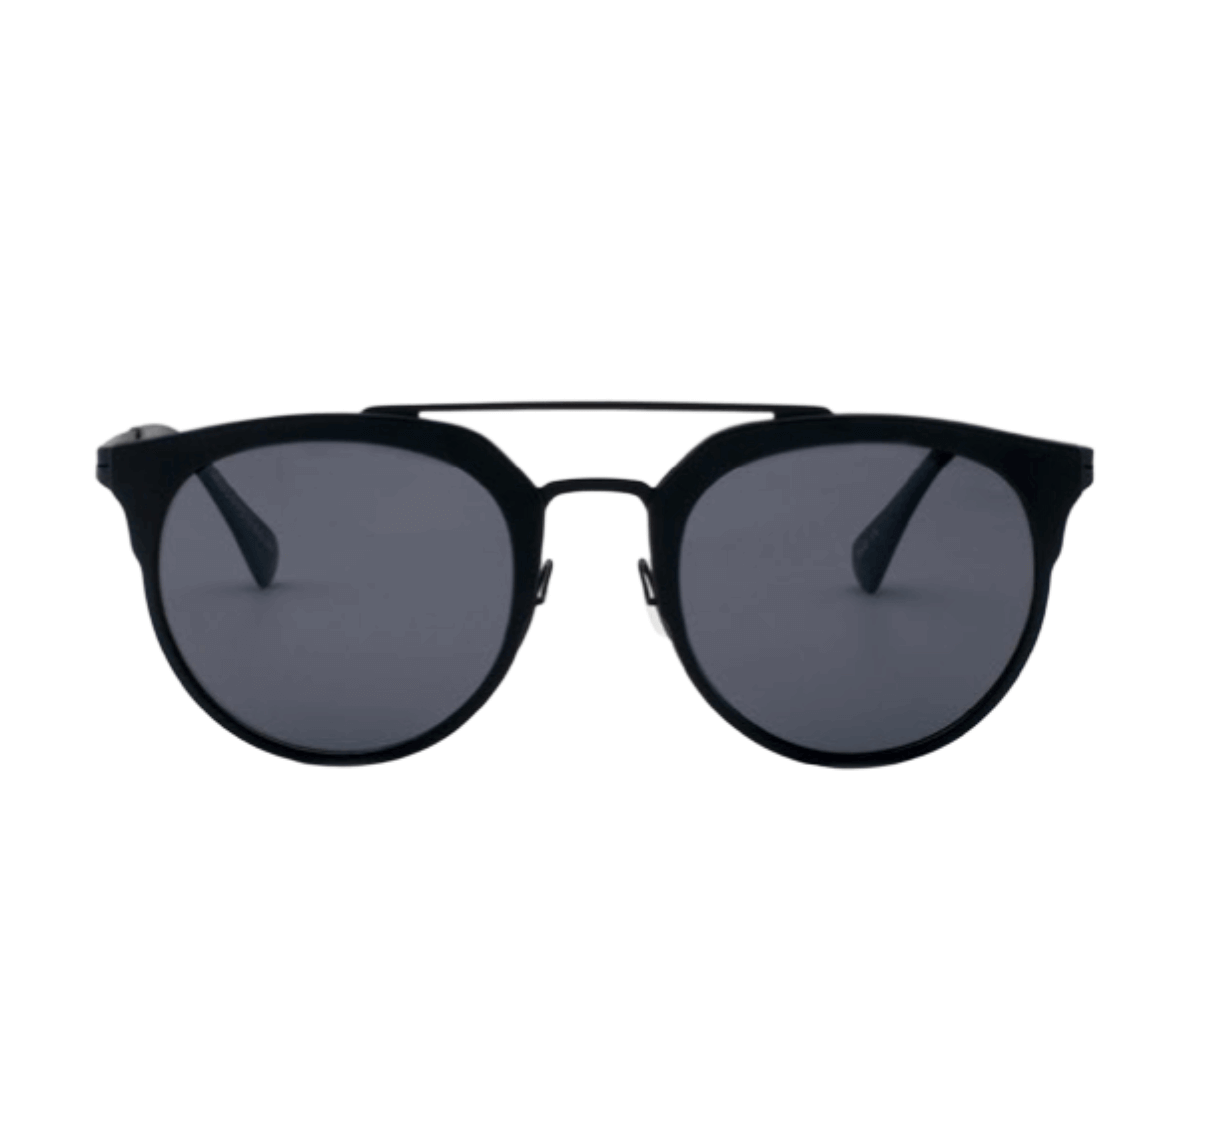 Chinese Sunglasses Manufacturers - Sunglasses Factory in China_Fashionable Sunglasses mens